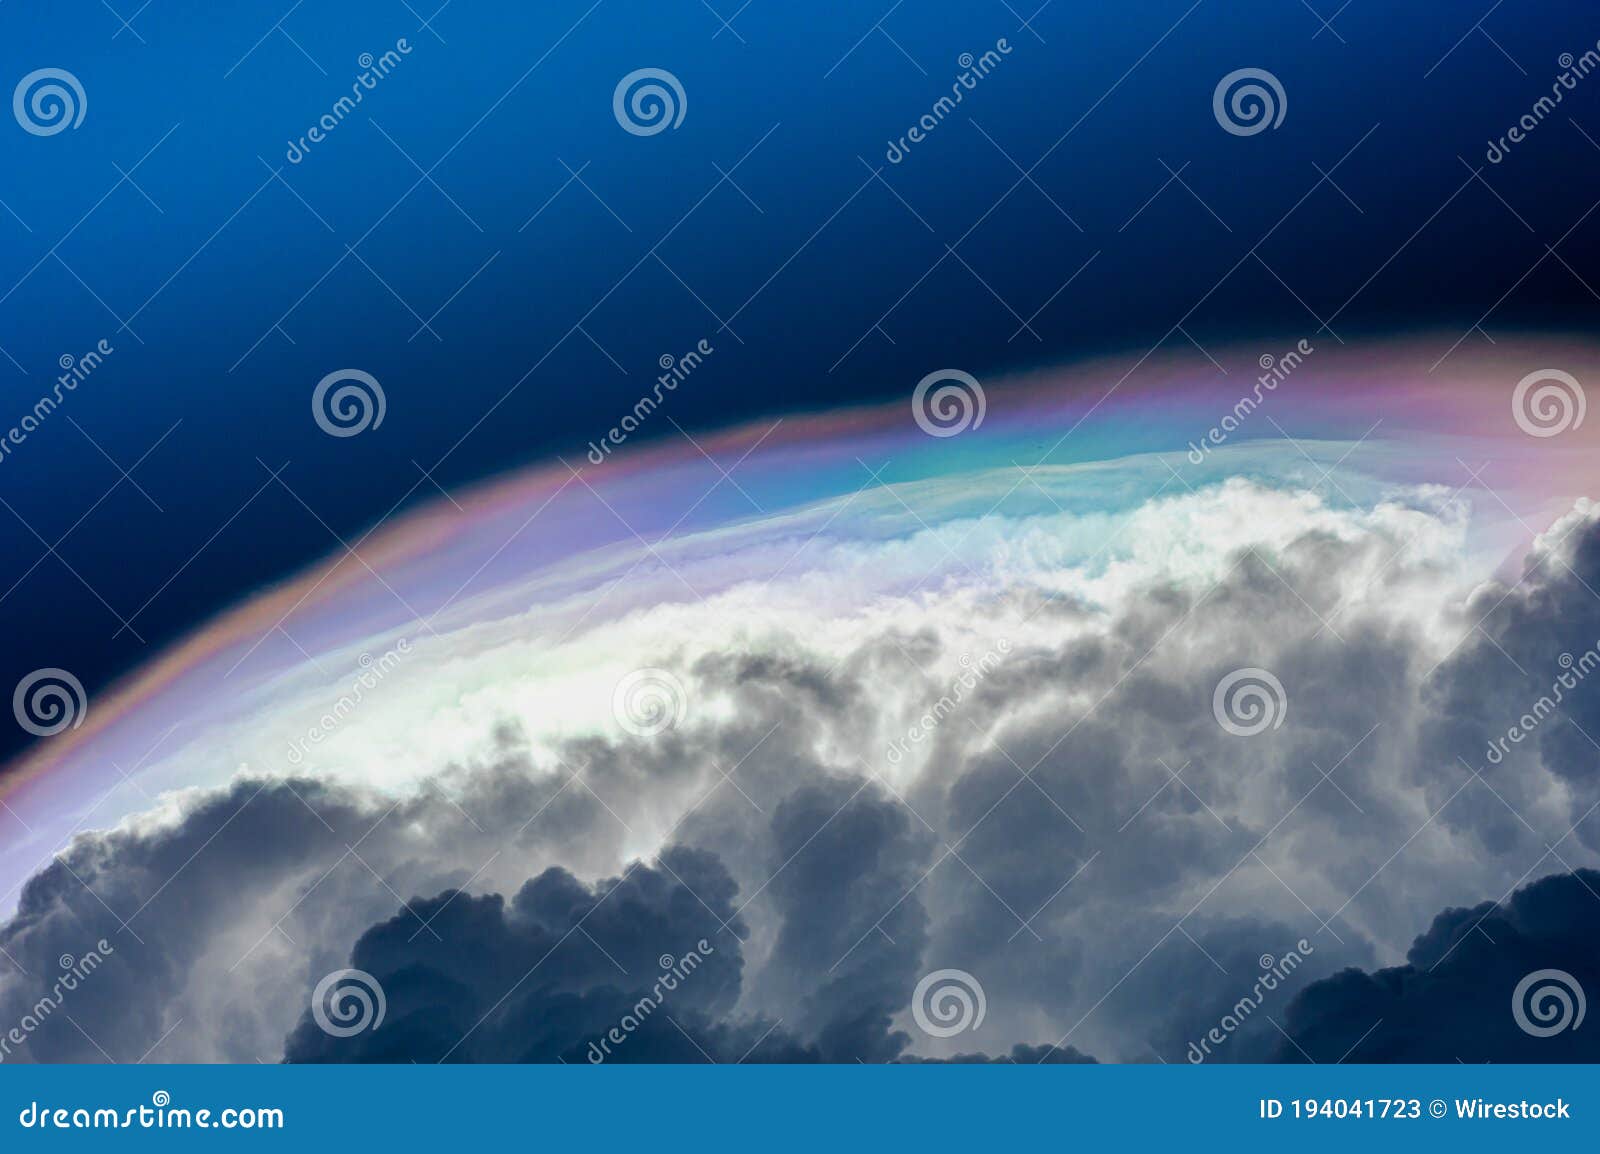 iridescent clouds in the sky